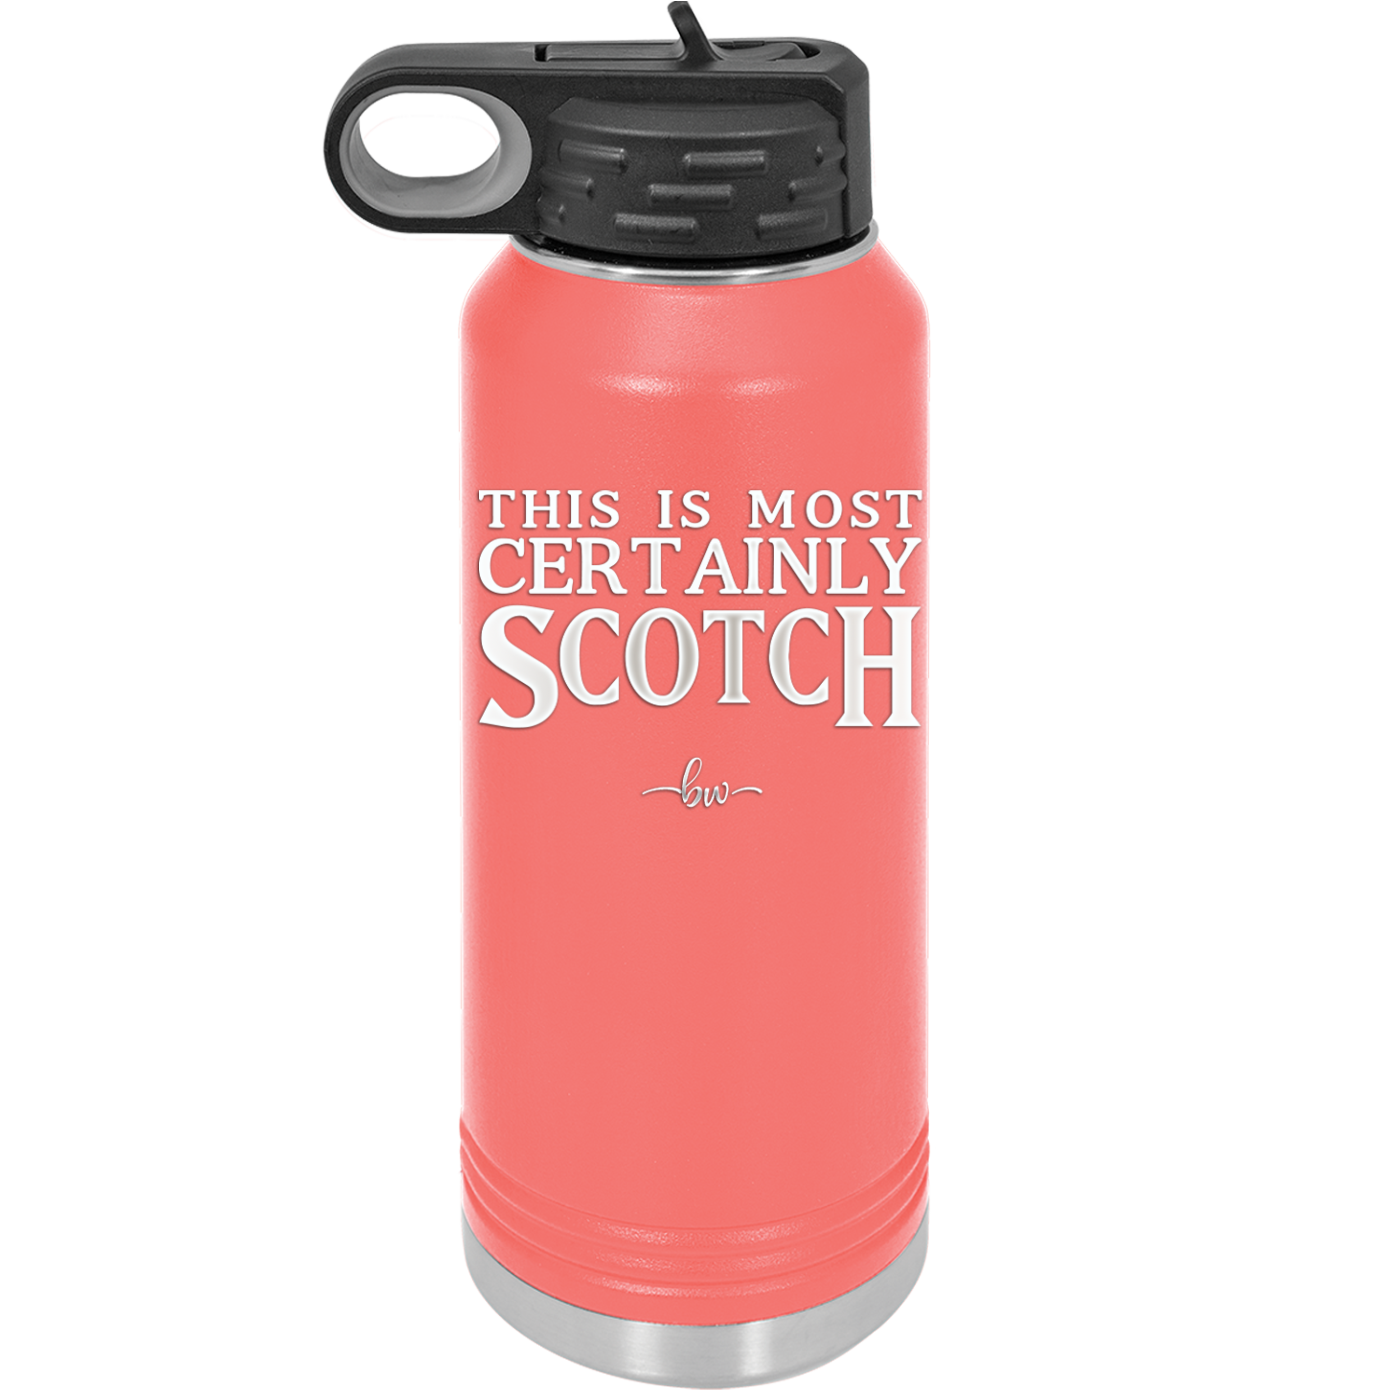 This is Most Certainly Scotch - Laser Engraved Stainless Steel Drinkware - 1082 -